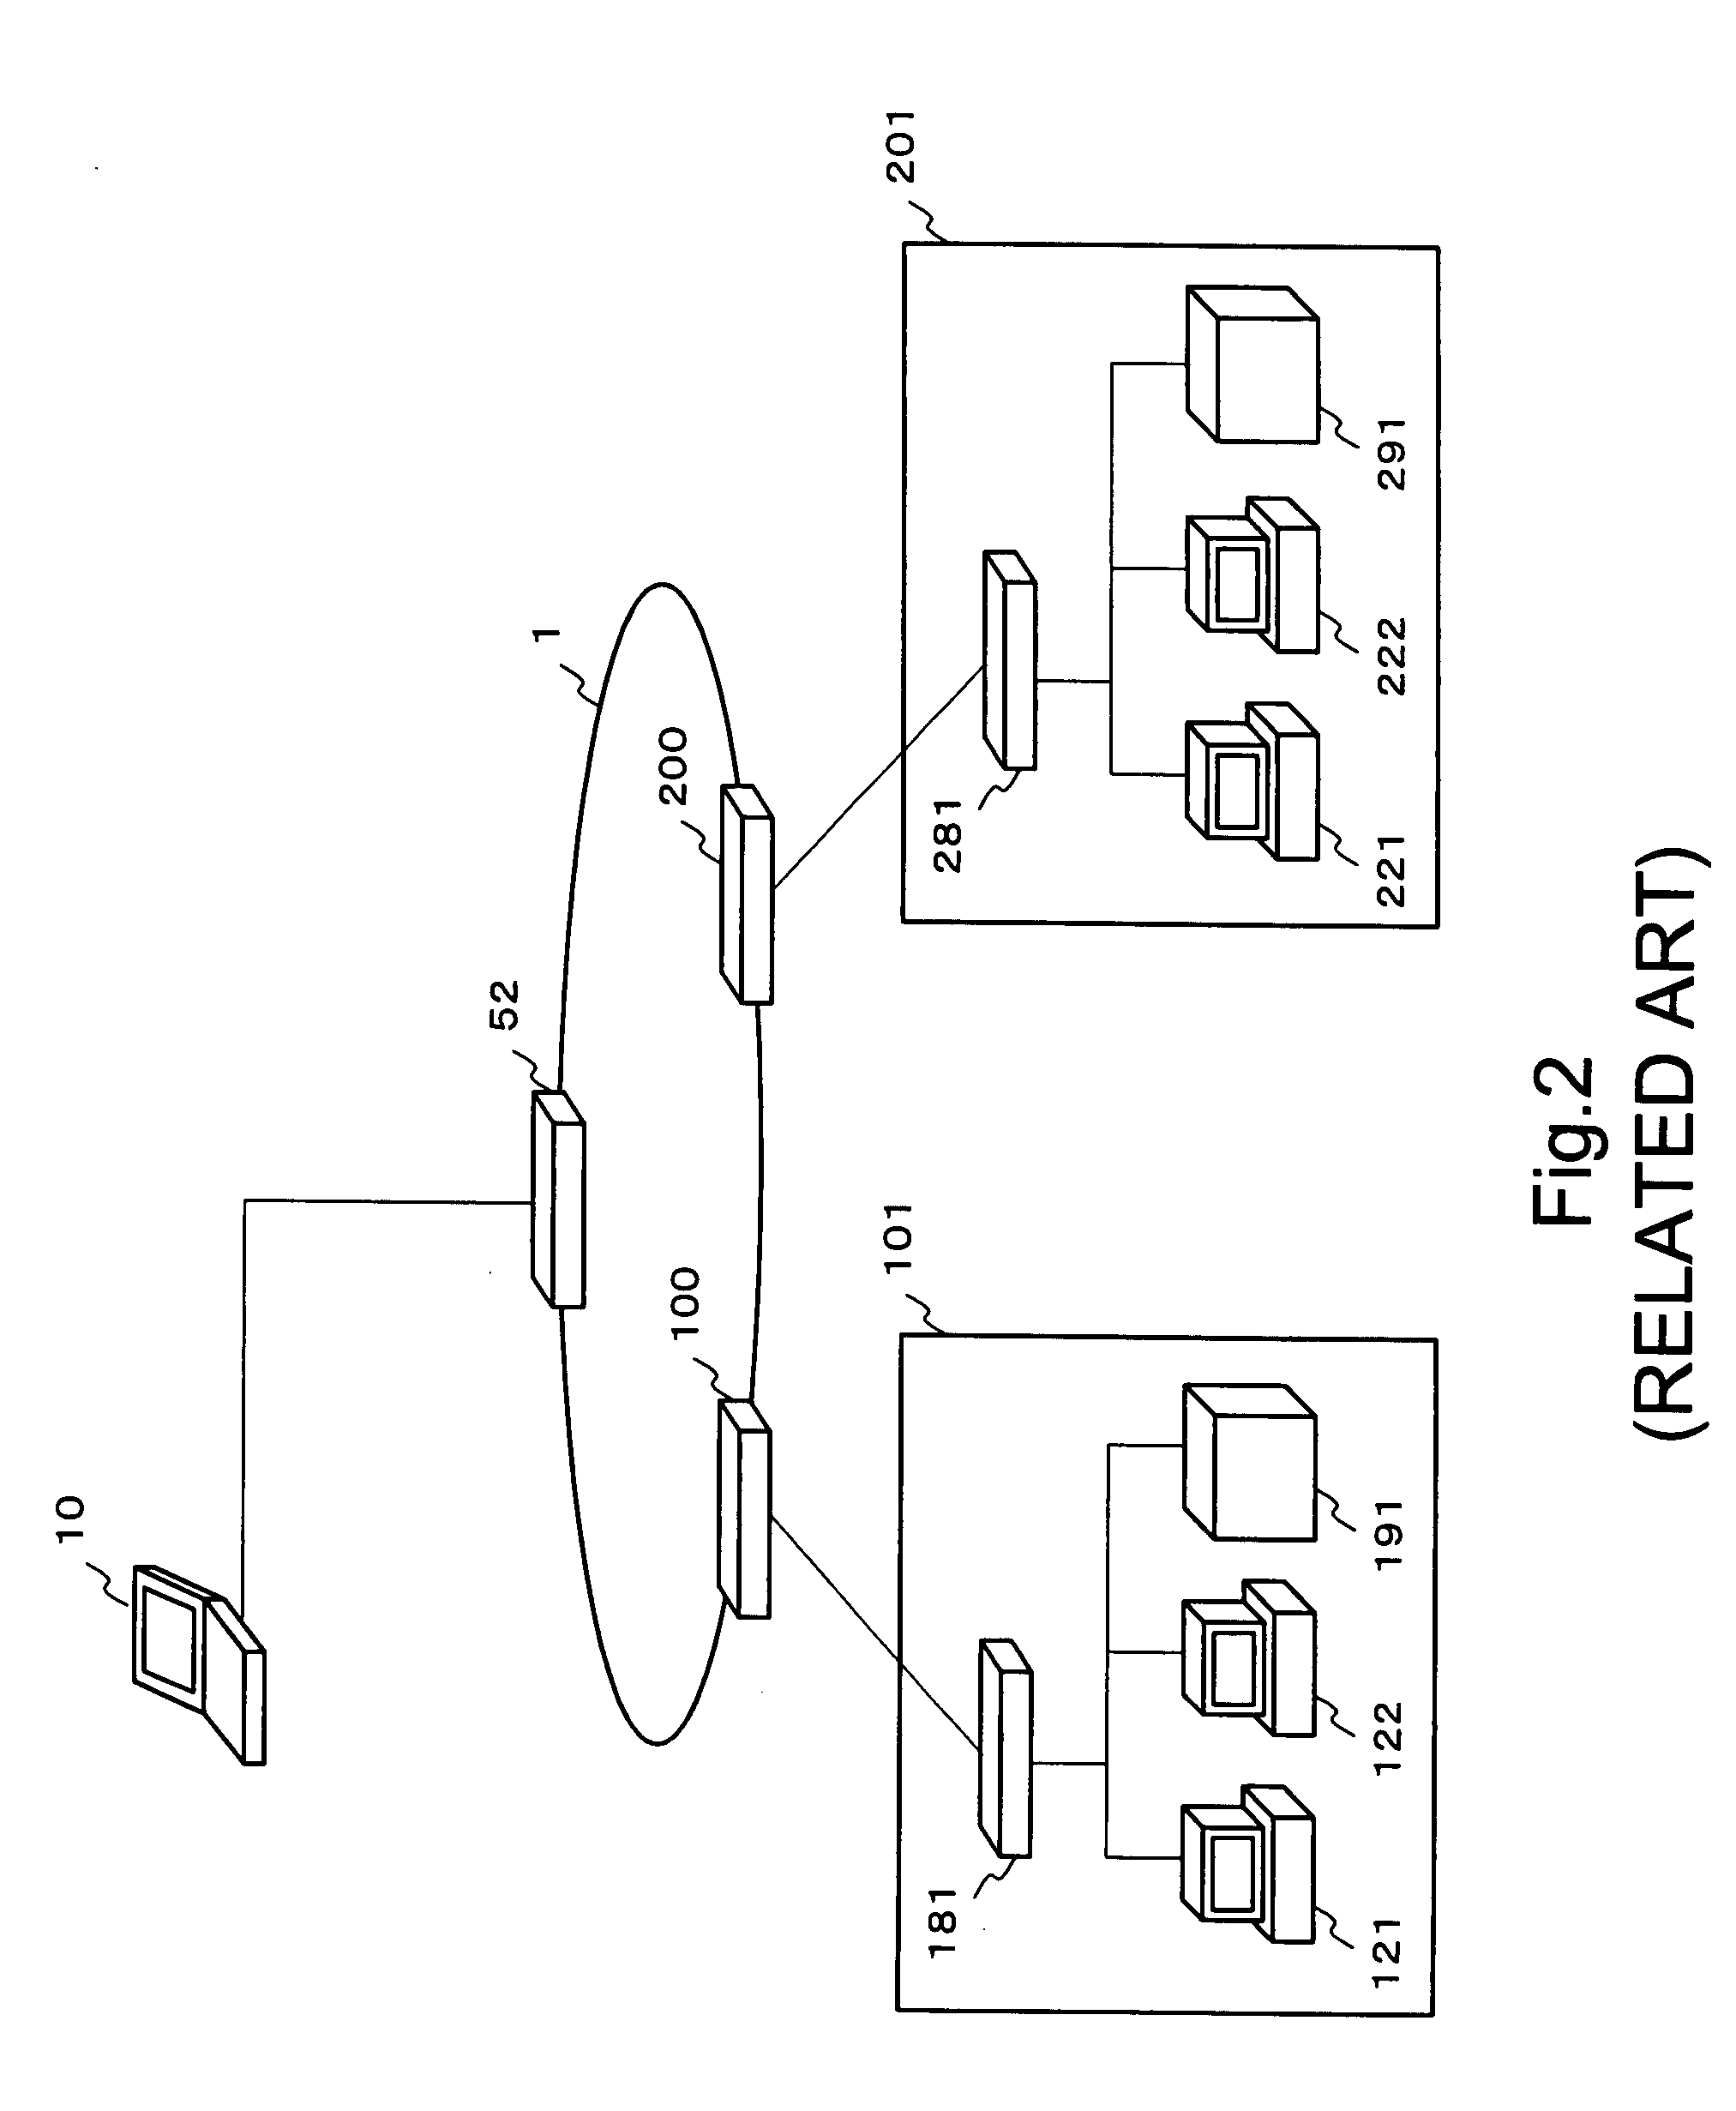 Apparatus and a system for remote control and a method thereof